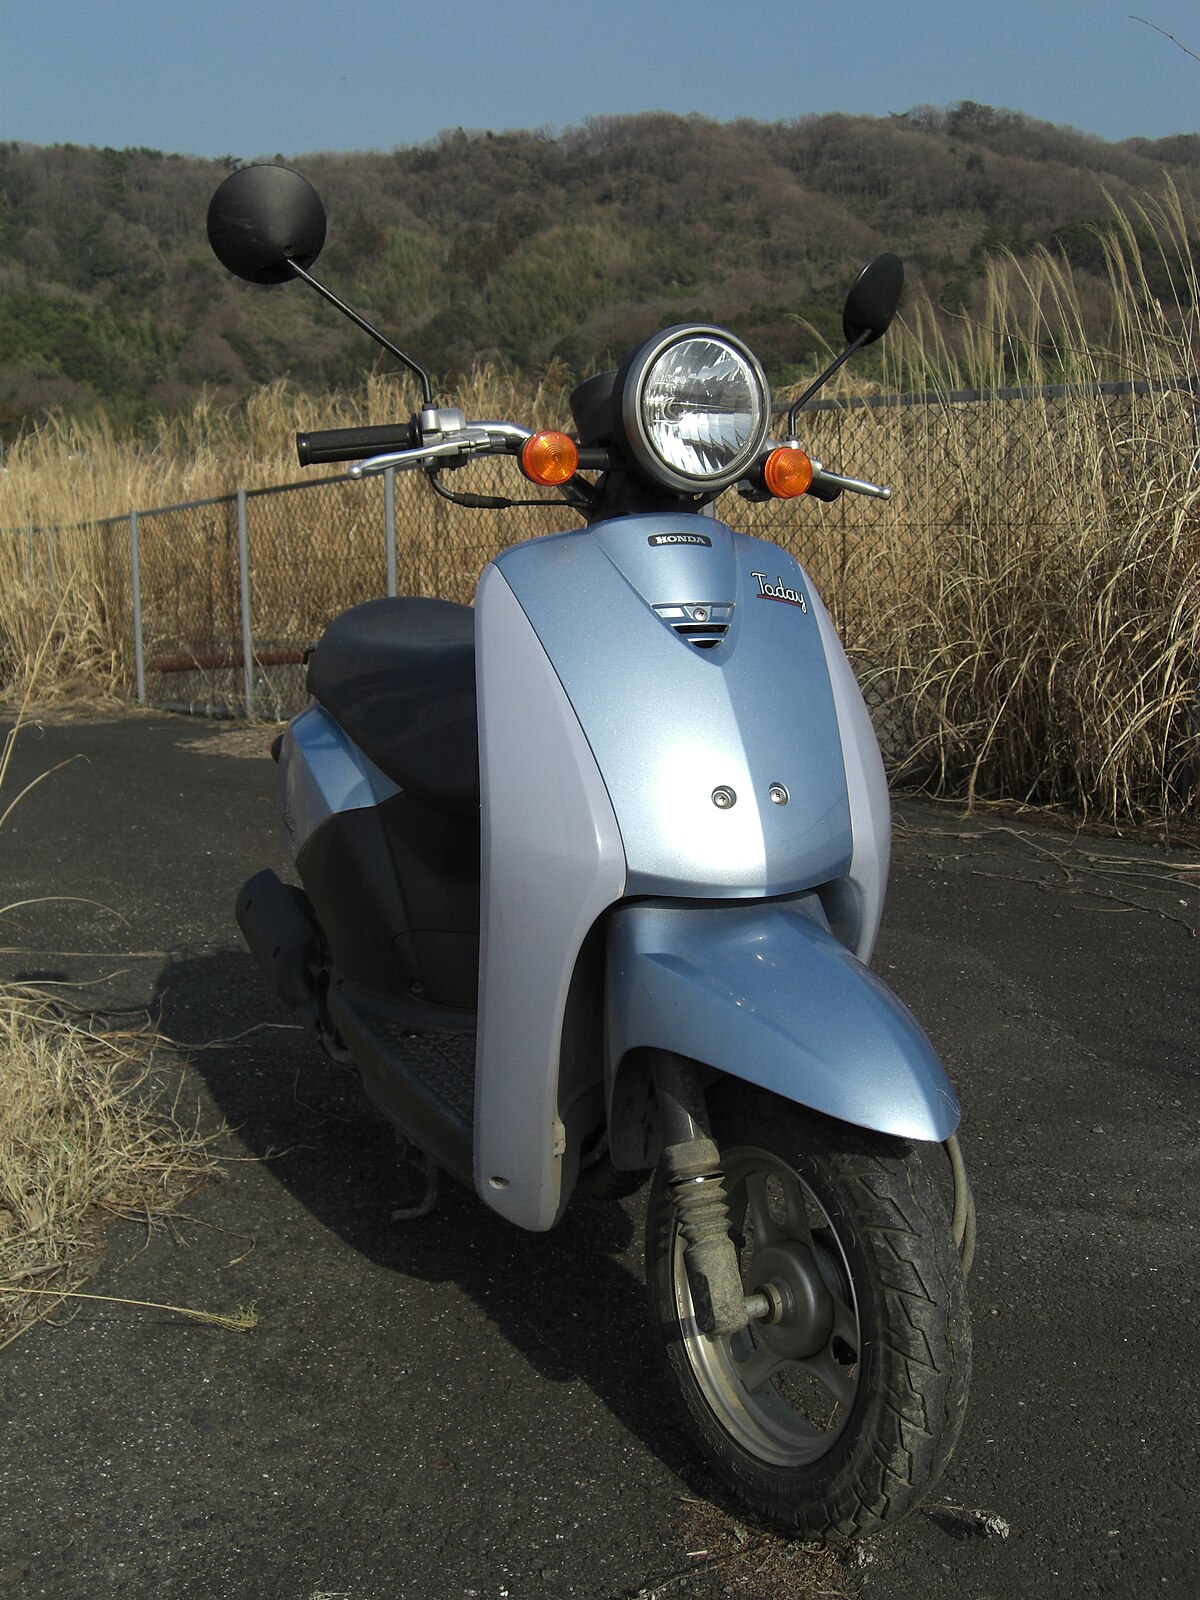 File:HONDA Today AF61.JPG - Wikimedia Commons